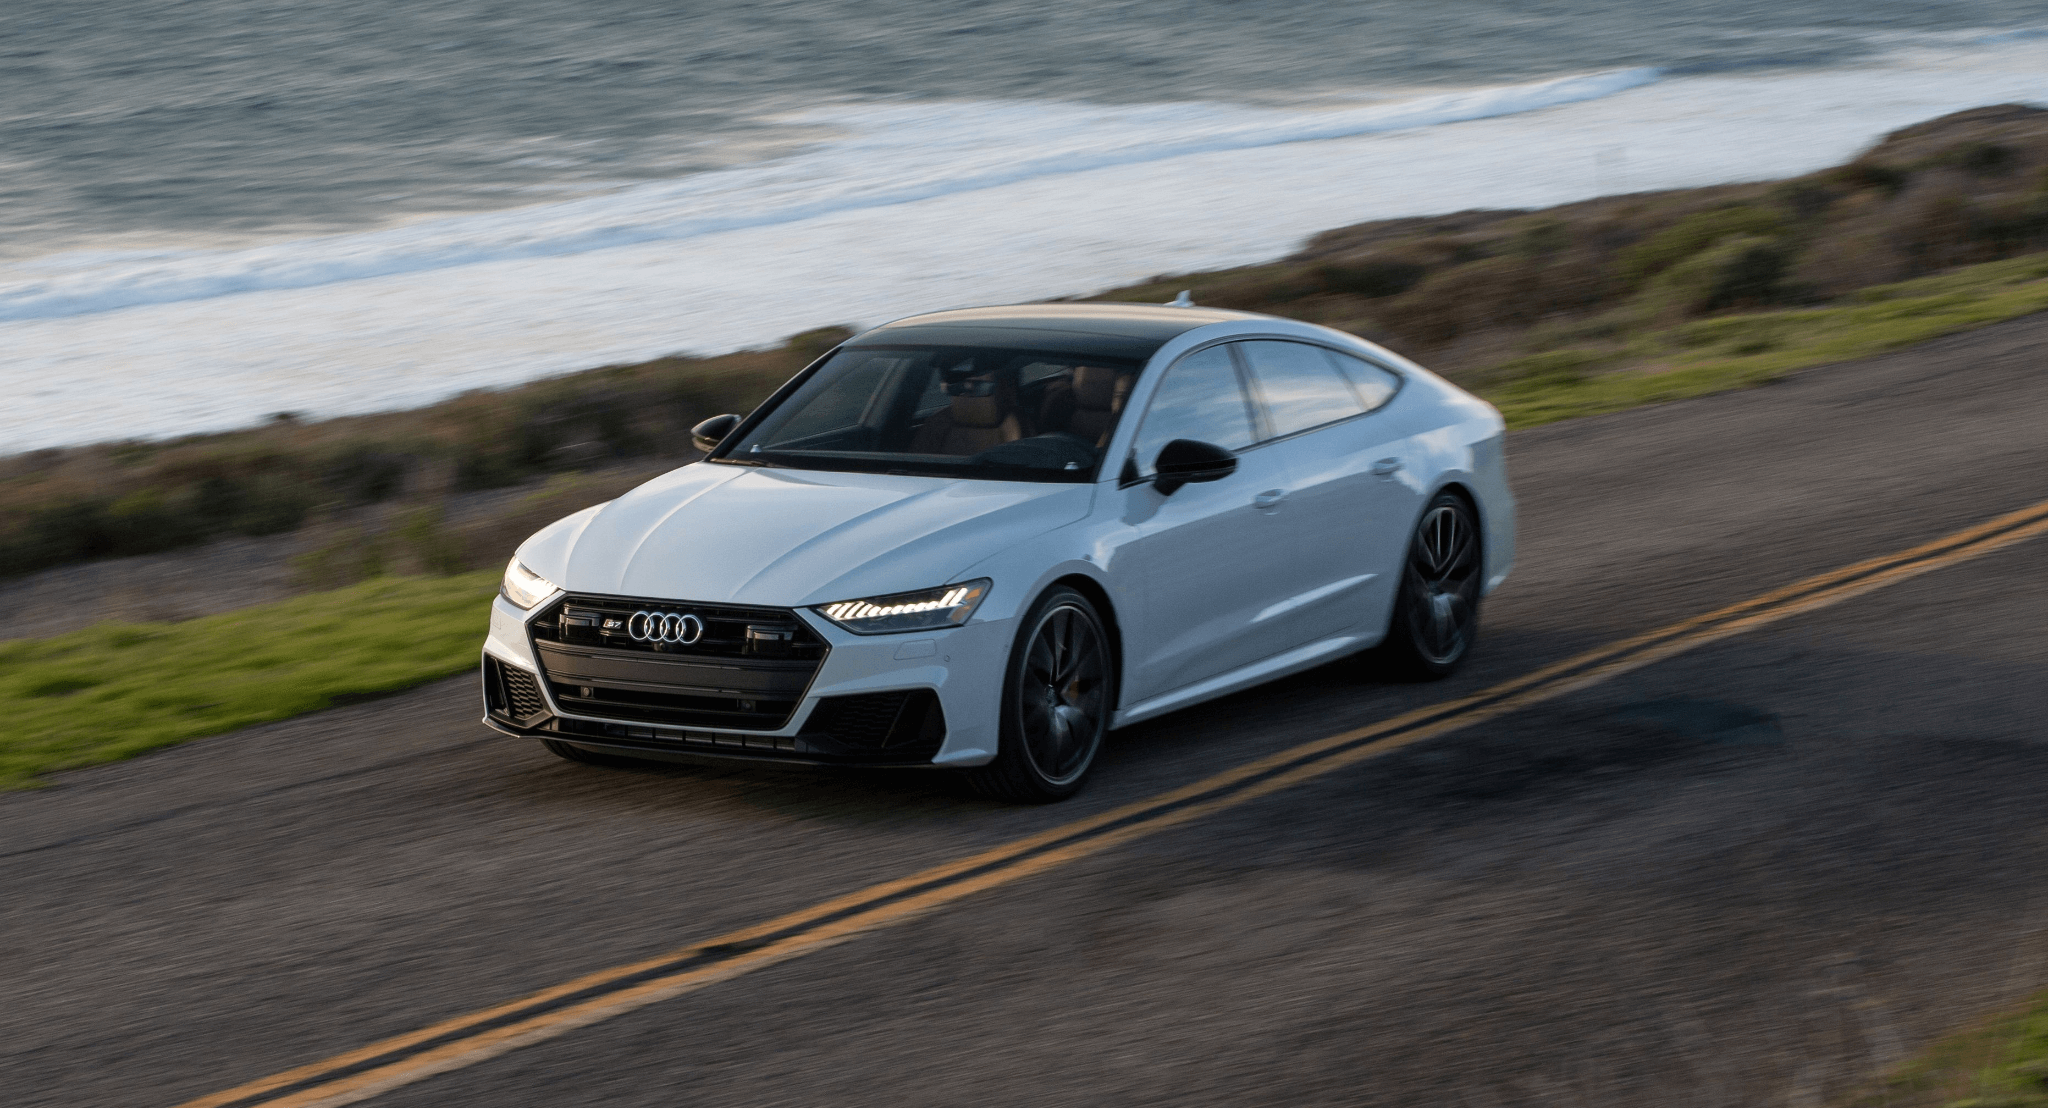 Audi S7 Is A Reliable Used Car